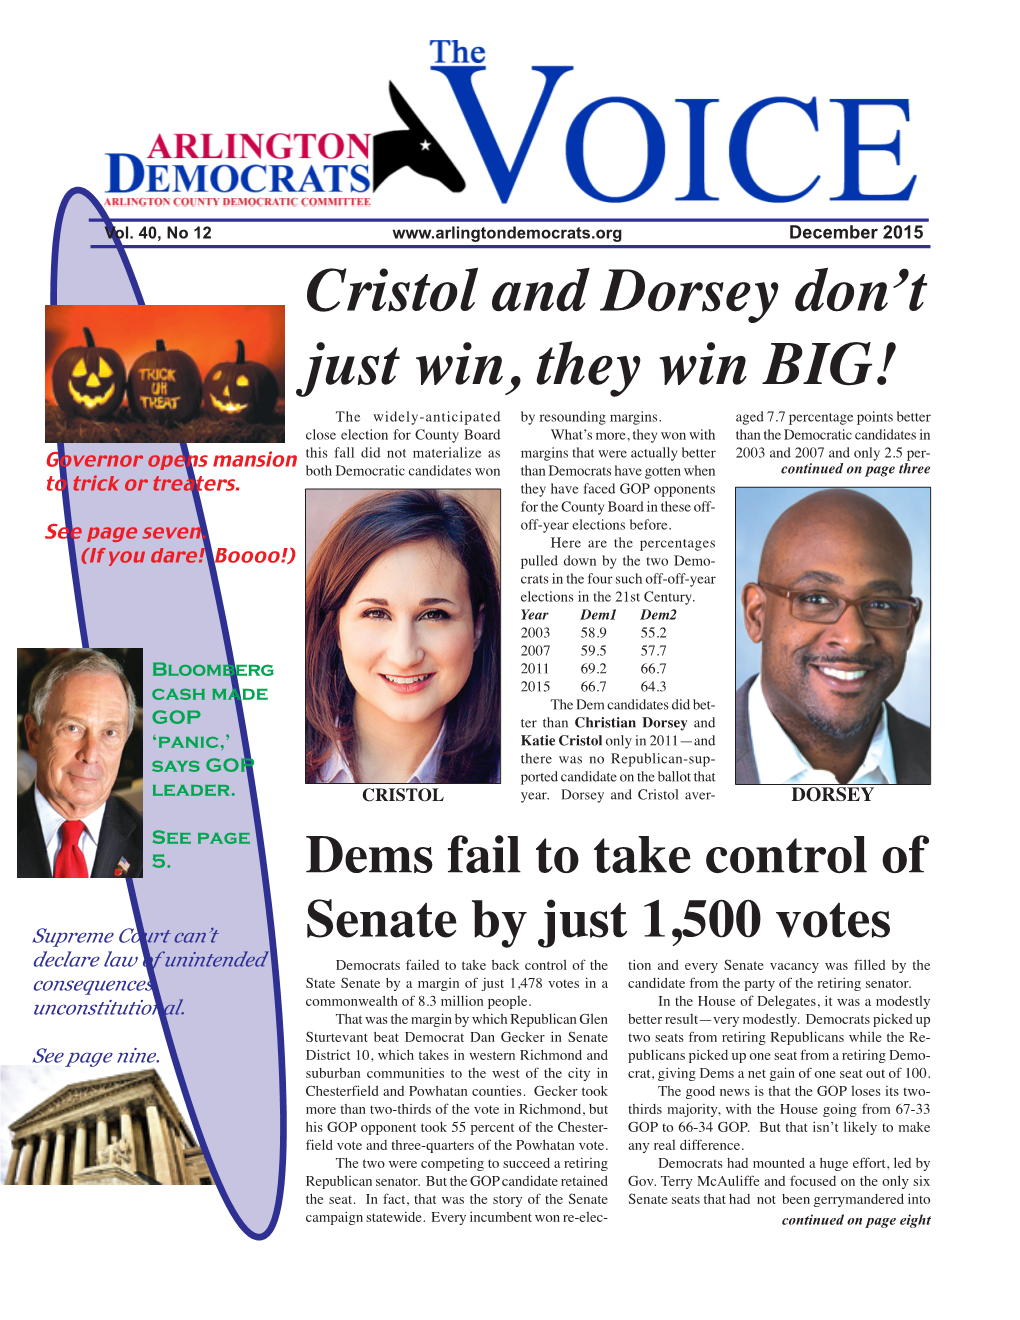 Cristol and Dorsey Don't Just Win, They Win BIG!